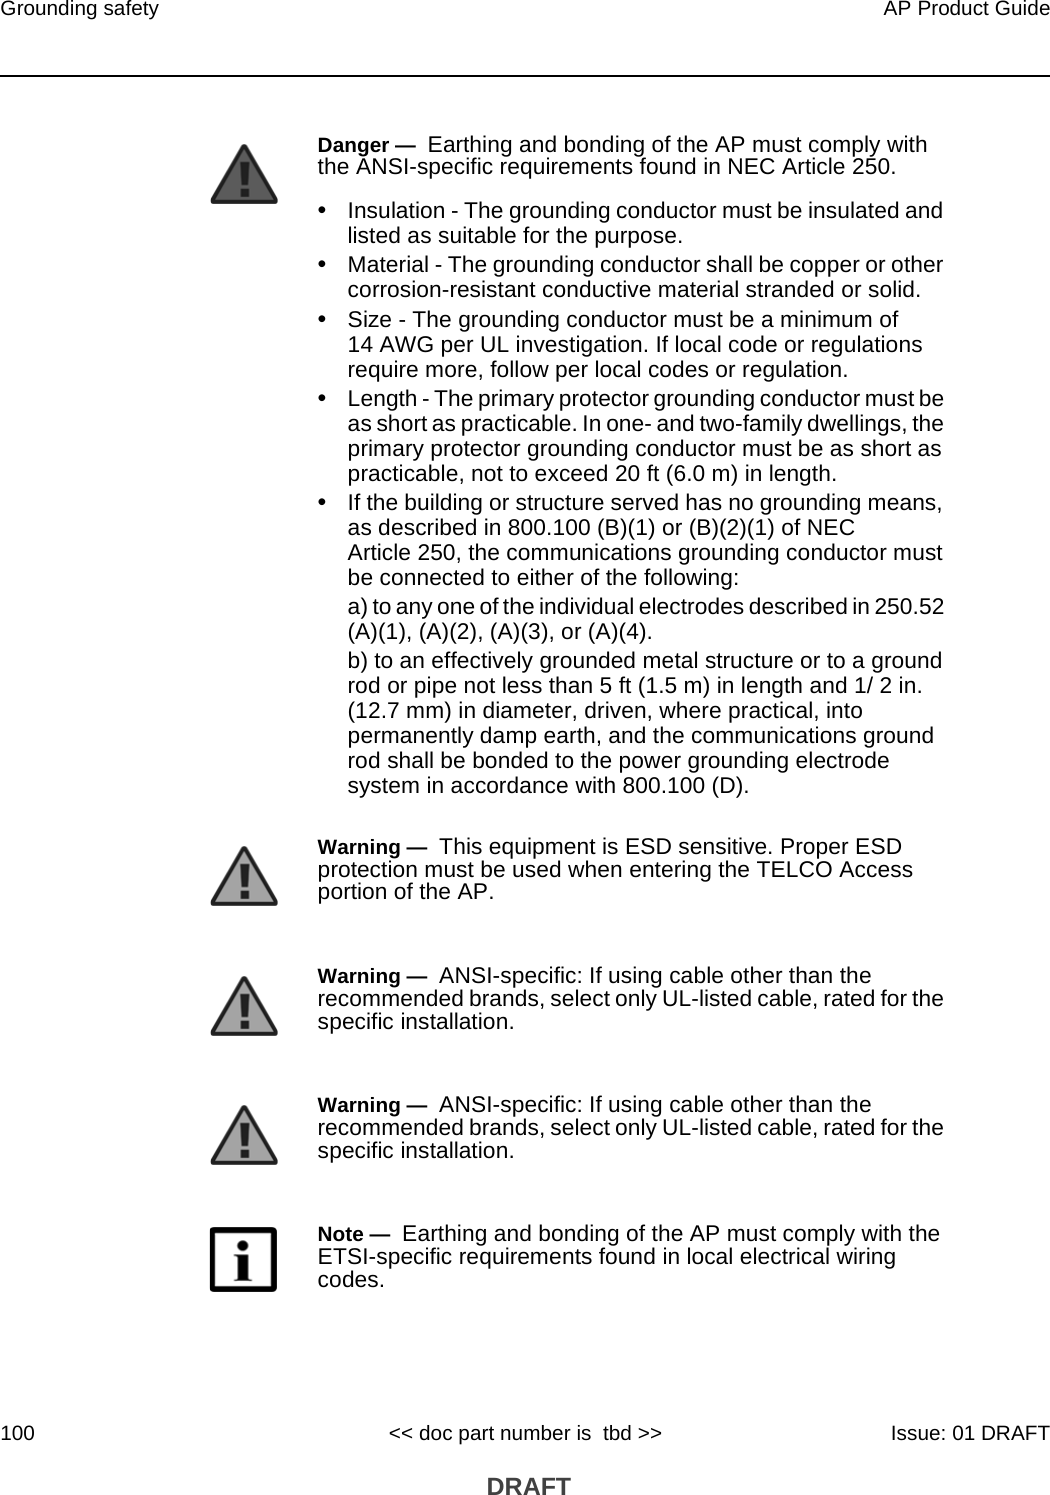 Grounding safety100AP Product Guide&lt;&lt; doc part number is  tbd &gt;&gt; Issue: 01 DRAFT DRAFTDanger —  Earthing and bonding of the AP must comply with the ANSI-specific requirements found in NEC Article 250.•Insulation - The grounding conductor must be insulated and listed as suitable for the purpose.•Material - The grounding conductor shall be copper or other corrosion-resistant conductive material stranded or solid.•Size - The grounding conductor must be a minimum of 14 AWG per UL investigation. If local code or regulations require more, follow per local codes or regulation.•Length - The primary protector grounding conductor must be as short as practicable. In one- and two-family dwellings, the primary protector grounding conductor must be as short as practicable, not to exceed 20 ft (6.0 m) in length.•If the building or structure served has no grounding means, as described in 800.100 (B)(1) or (B)(2)(1) of NEC Article 250, the communications grounding conductor must be connected to either of the following:a) to any one of the individual electrodes described in 250.52 (A)(1), (A)(2), (A)(3), or (A)(4).b) to an effectively grounded metal structure or to a ground rod or pipe not less than 5 ft (1.5 m) in length and 1/ 2 in. (12.7 mm) in diameter, driven, where practical, into permanently damp earth, and the communications ground rod shall be bonded to the power grounding electrode system in accordance with 800.100 (D).Warning —  This equipment is ESD sensitive. Proper ESD protection must be used when entering the TELCO Access portion of the AP.Warning —  ANSI-specific: If using cable other than the recommended brands, select only UL-listed cable, rated for the specific installation.Warning —  ANSI-specific: If using cable other than the recommended brands, select only UL-listed cable, rated for the specific installation.Note —  Earthing and bonding of the AP must comply with the ETSI-specific requirements found in local electrical wiring codes.